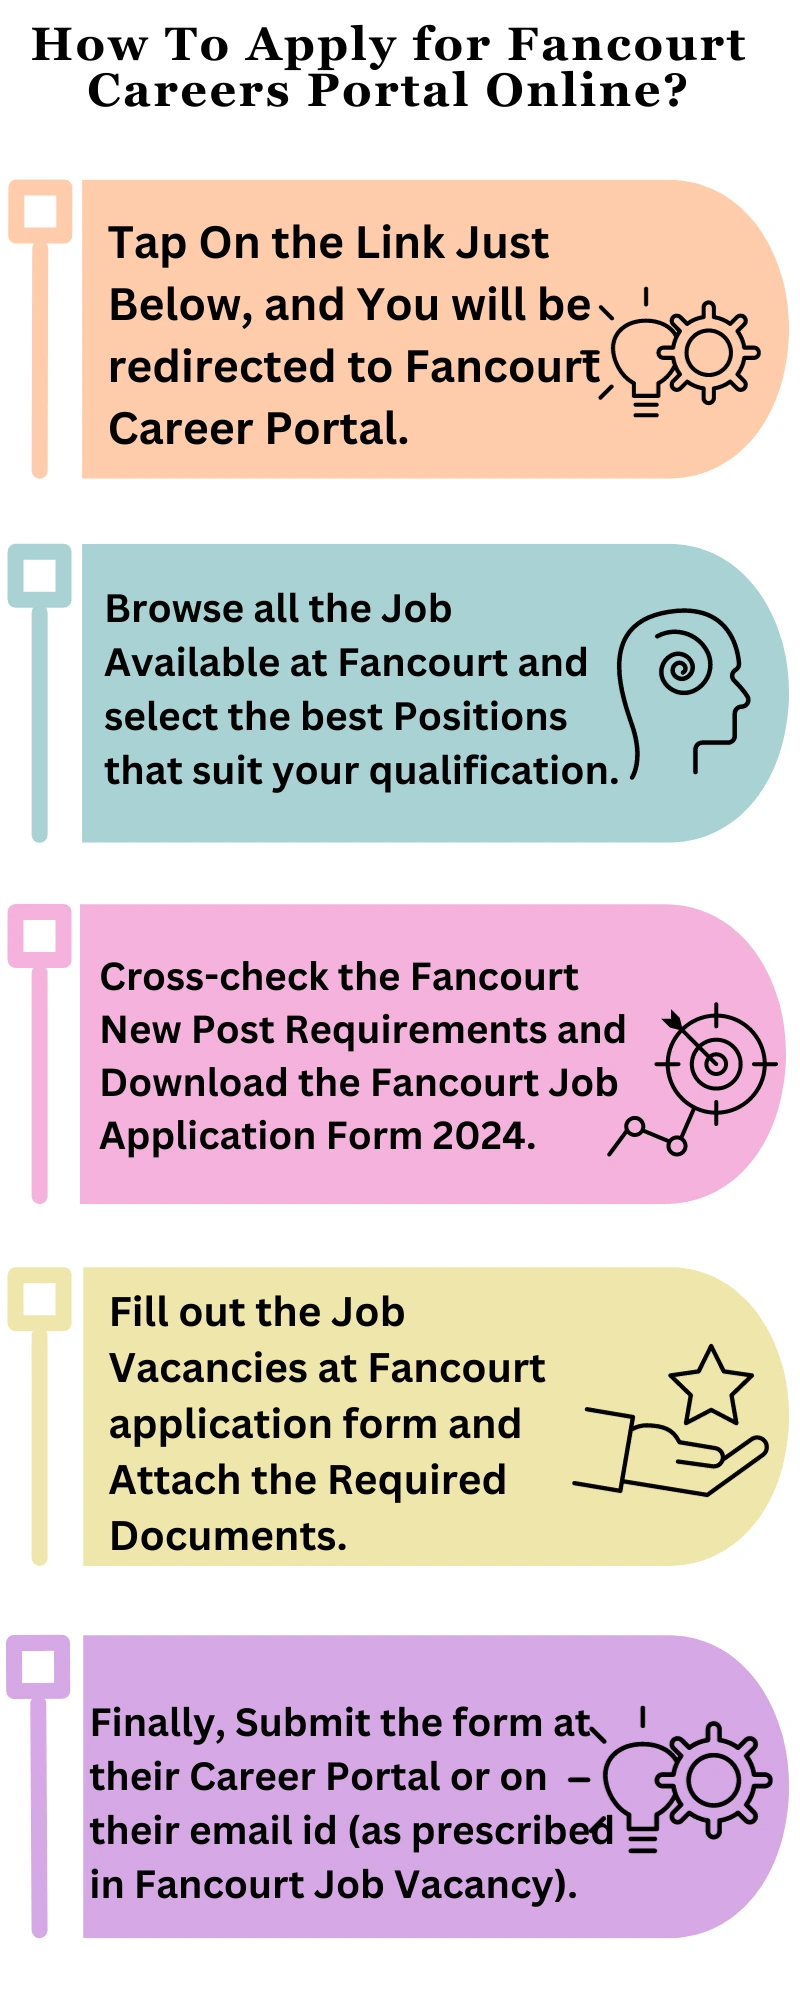 How To Apply for Fancourt Careers Portal Online?